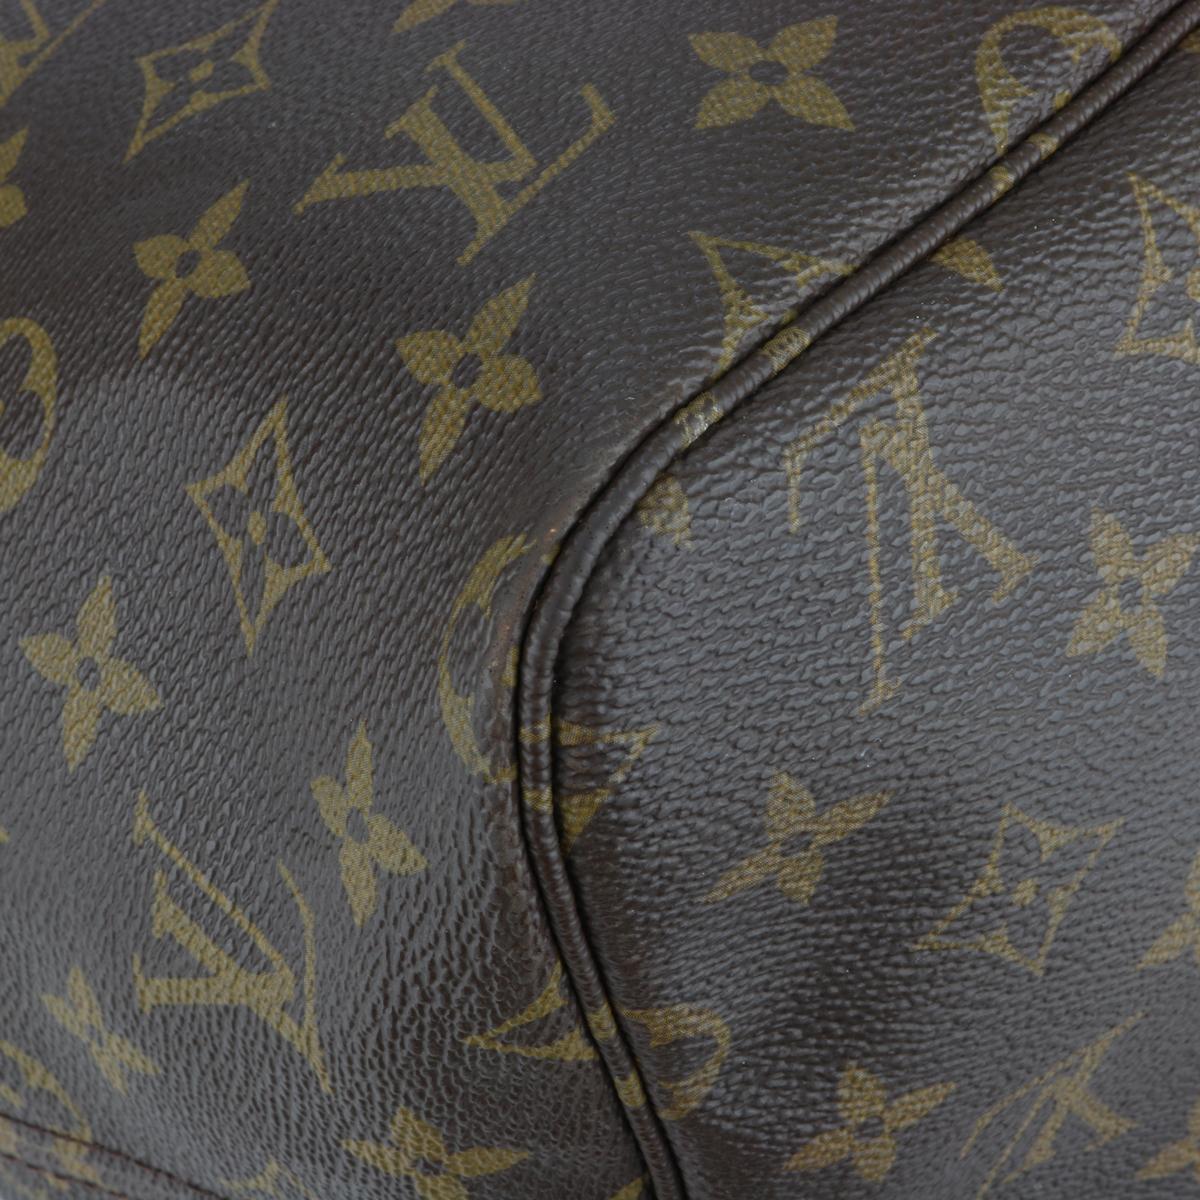 Louis Vuitton Neverfull GM Bag in Monogram with Beige Interior 2008 6